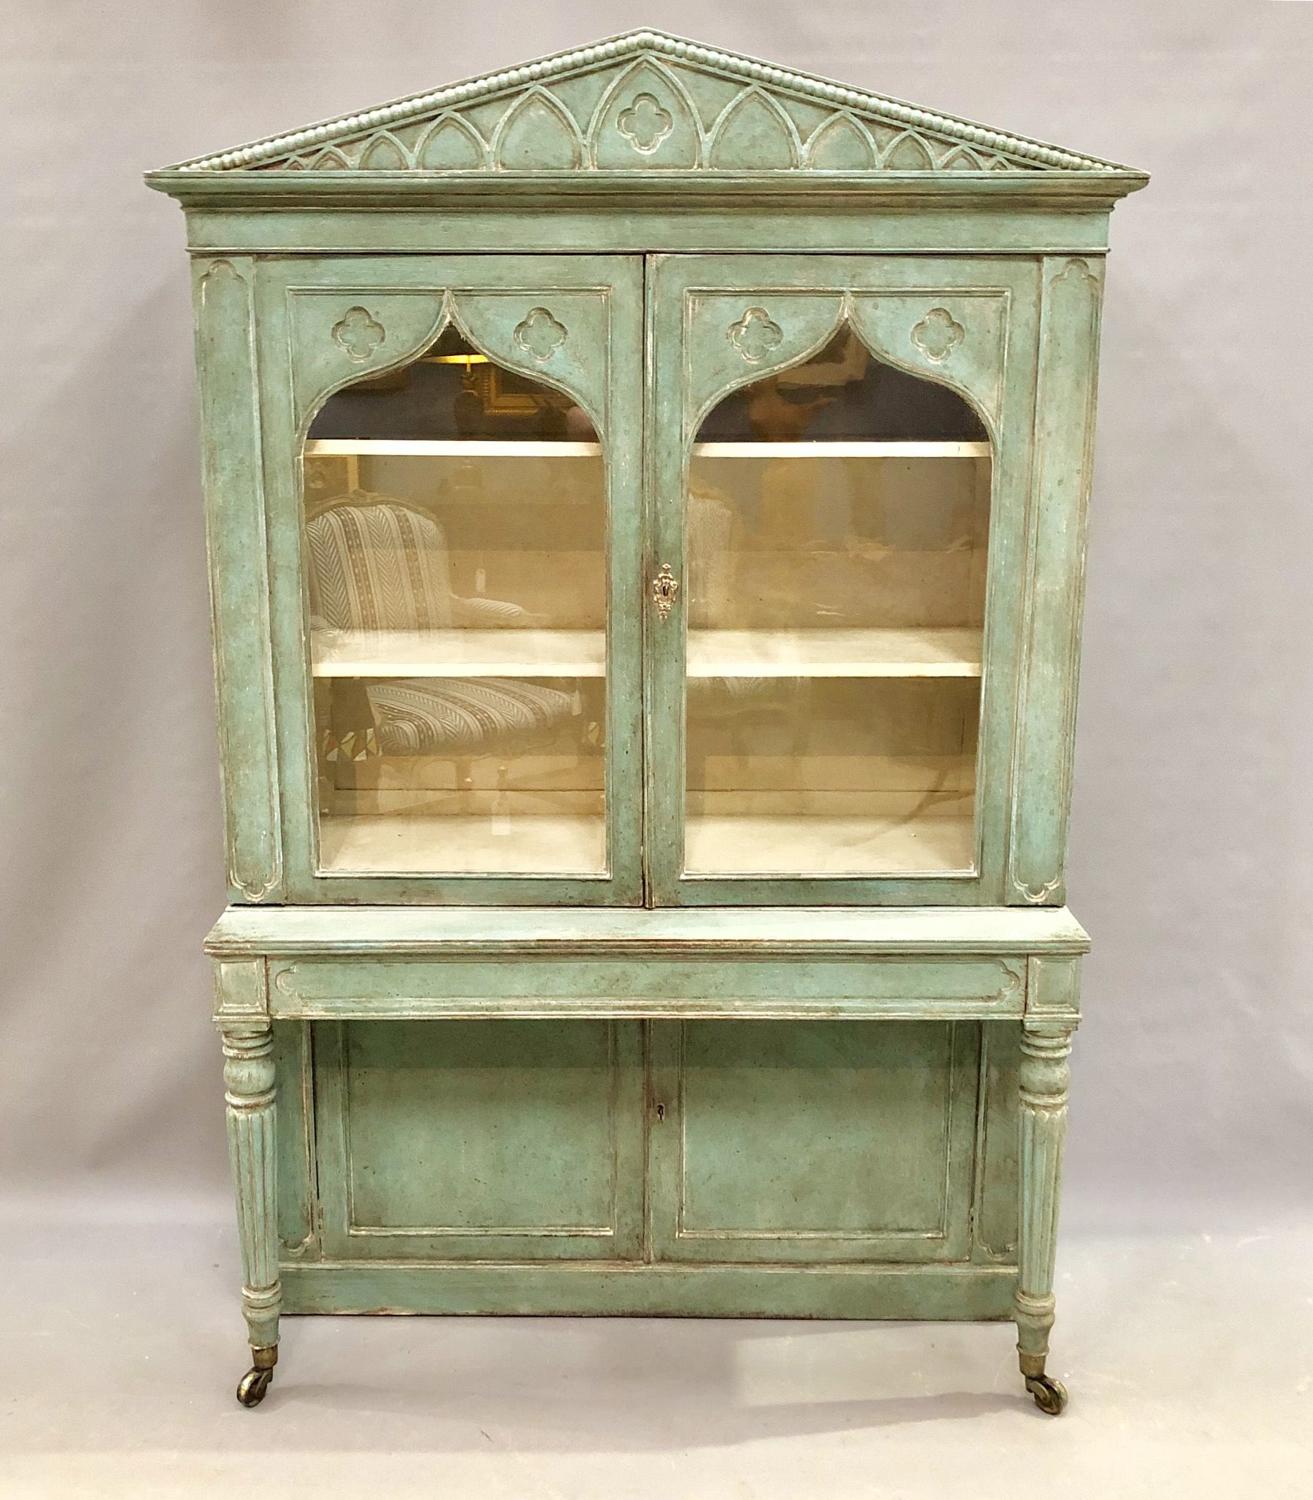 A painted Regency period Gothic cabinet